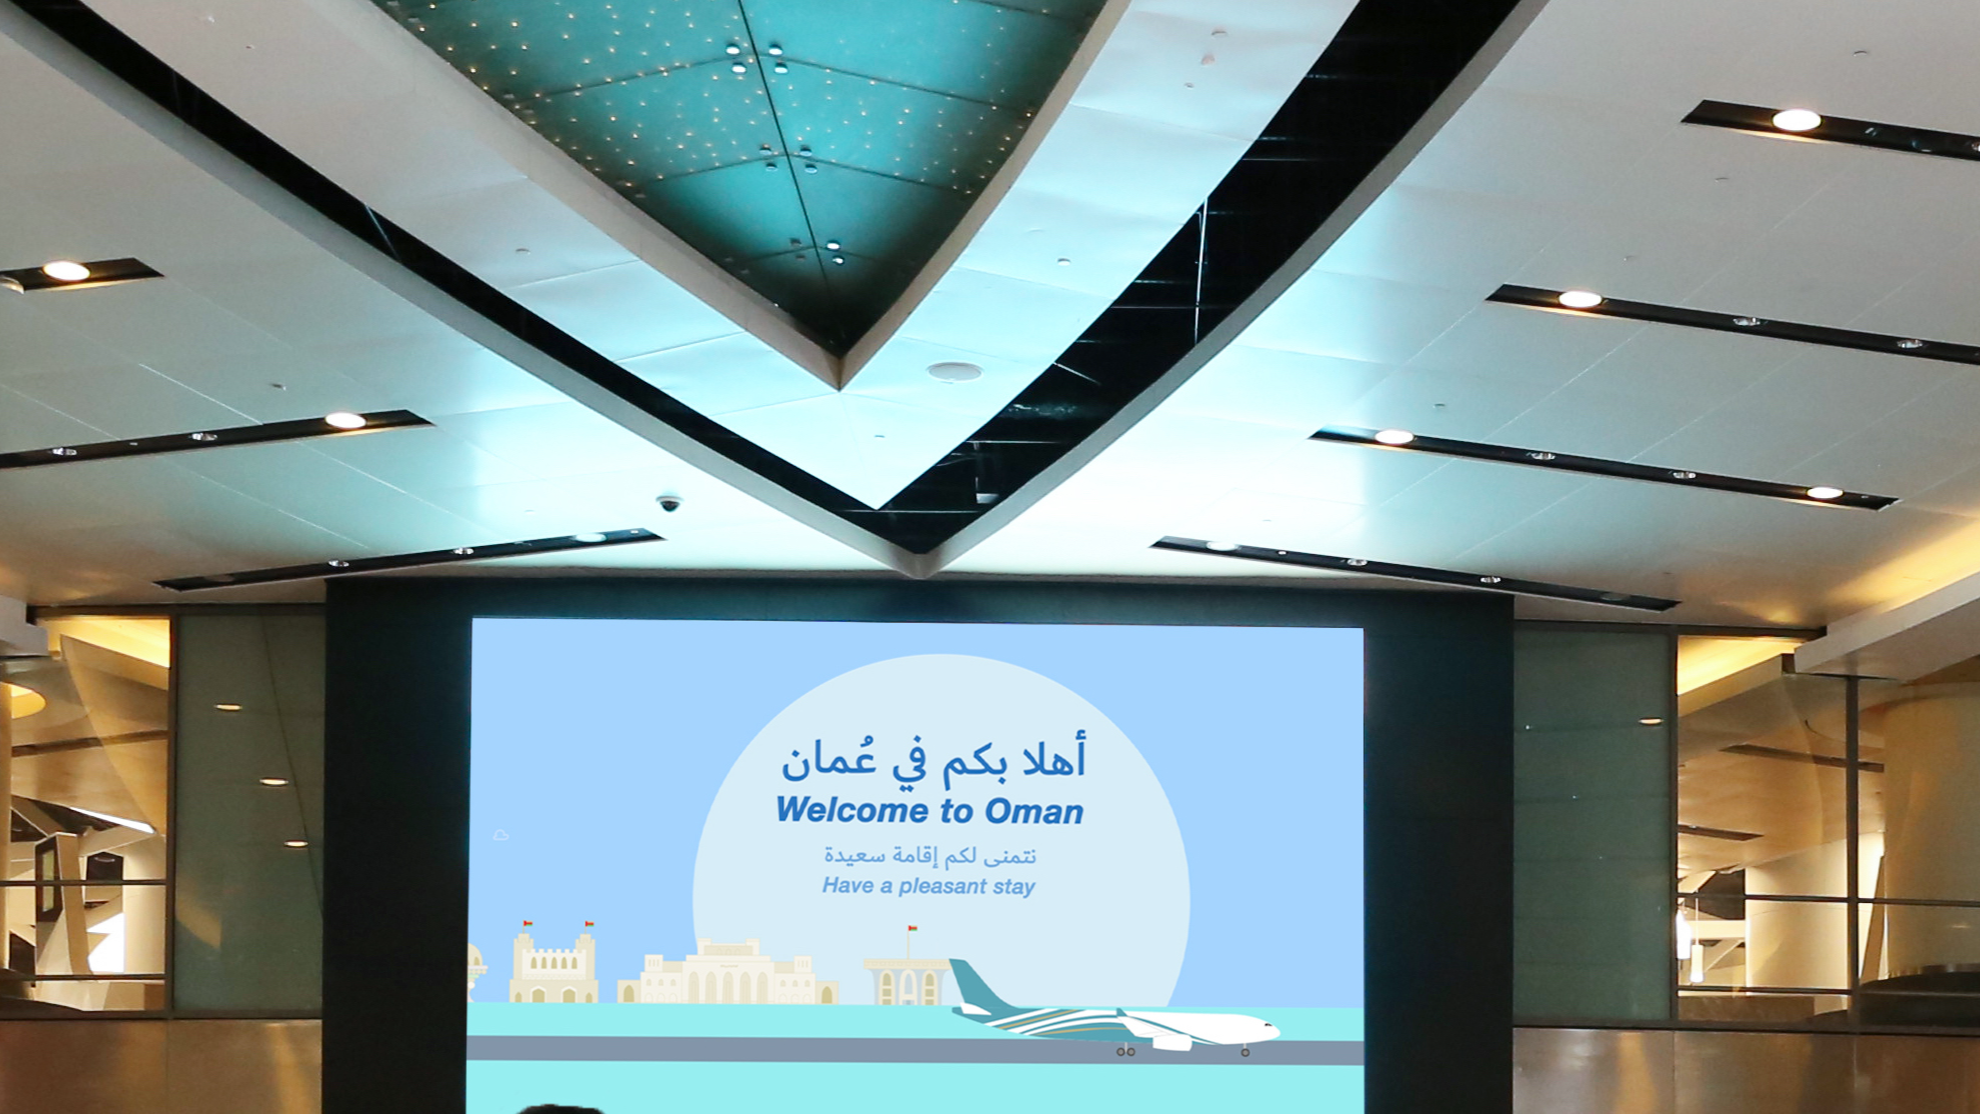 https://adgully.me/post/2781/jcdeaux-launches-high-tech-ad-screens-at-oman-airports